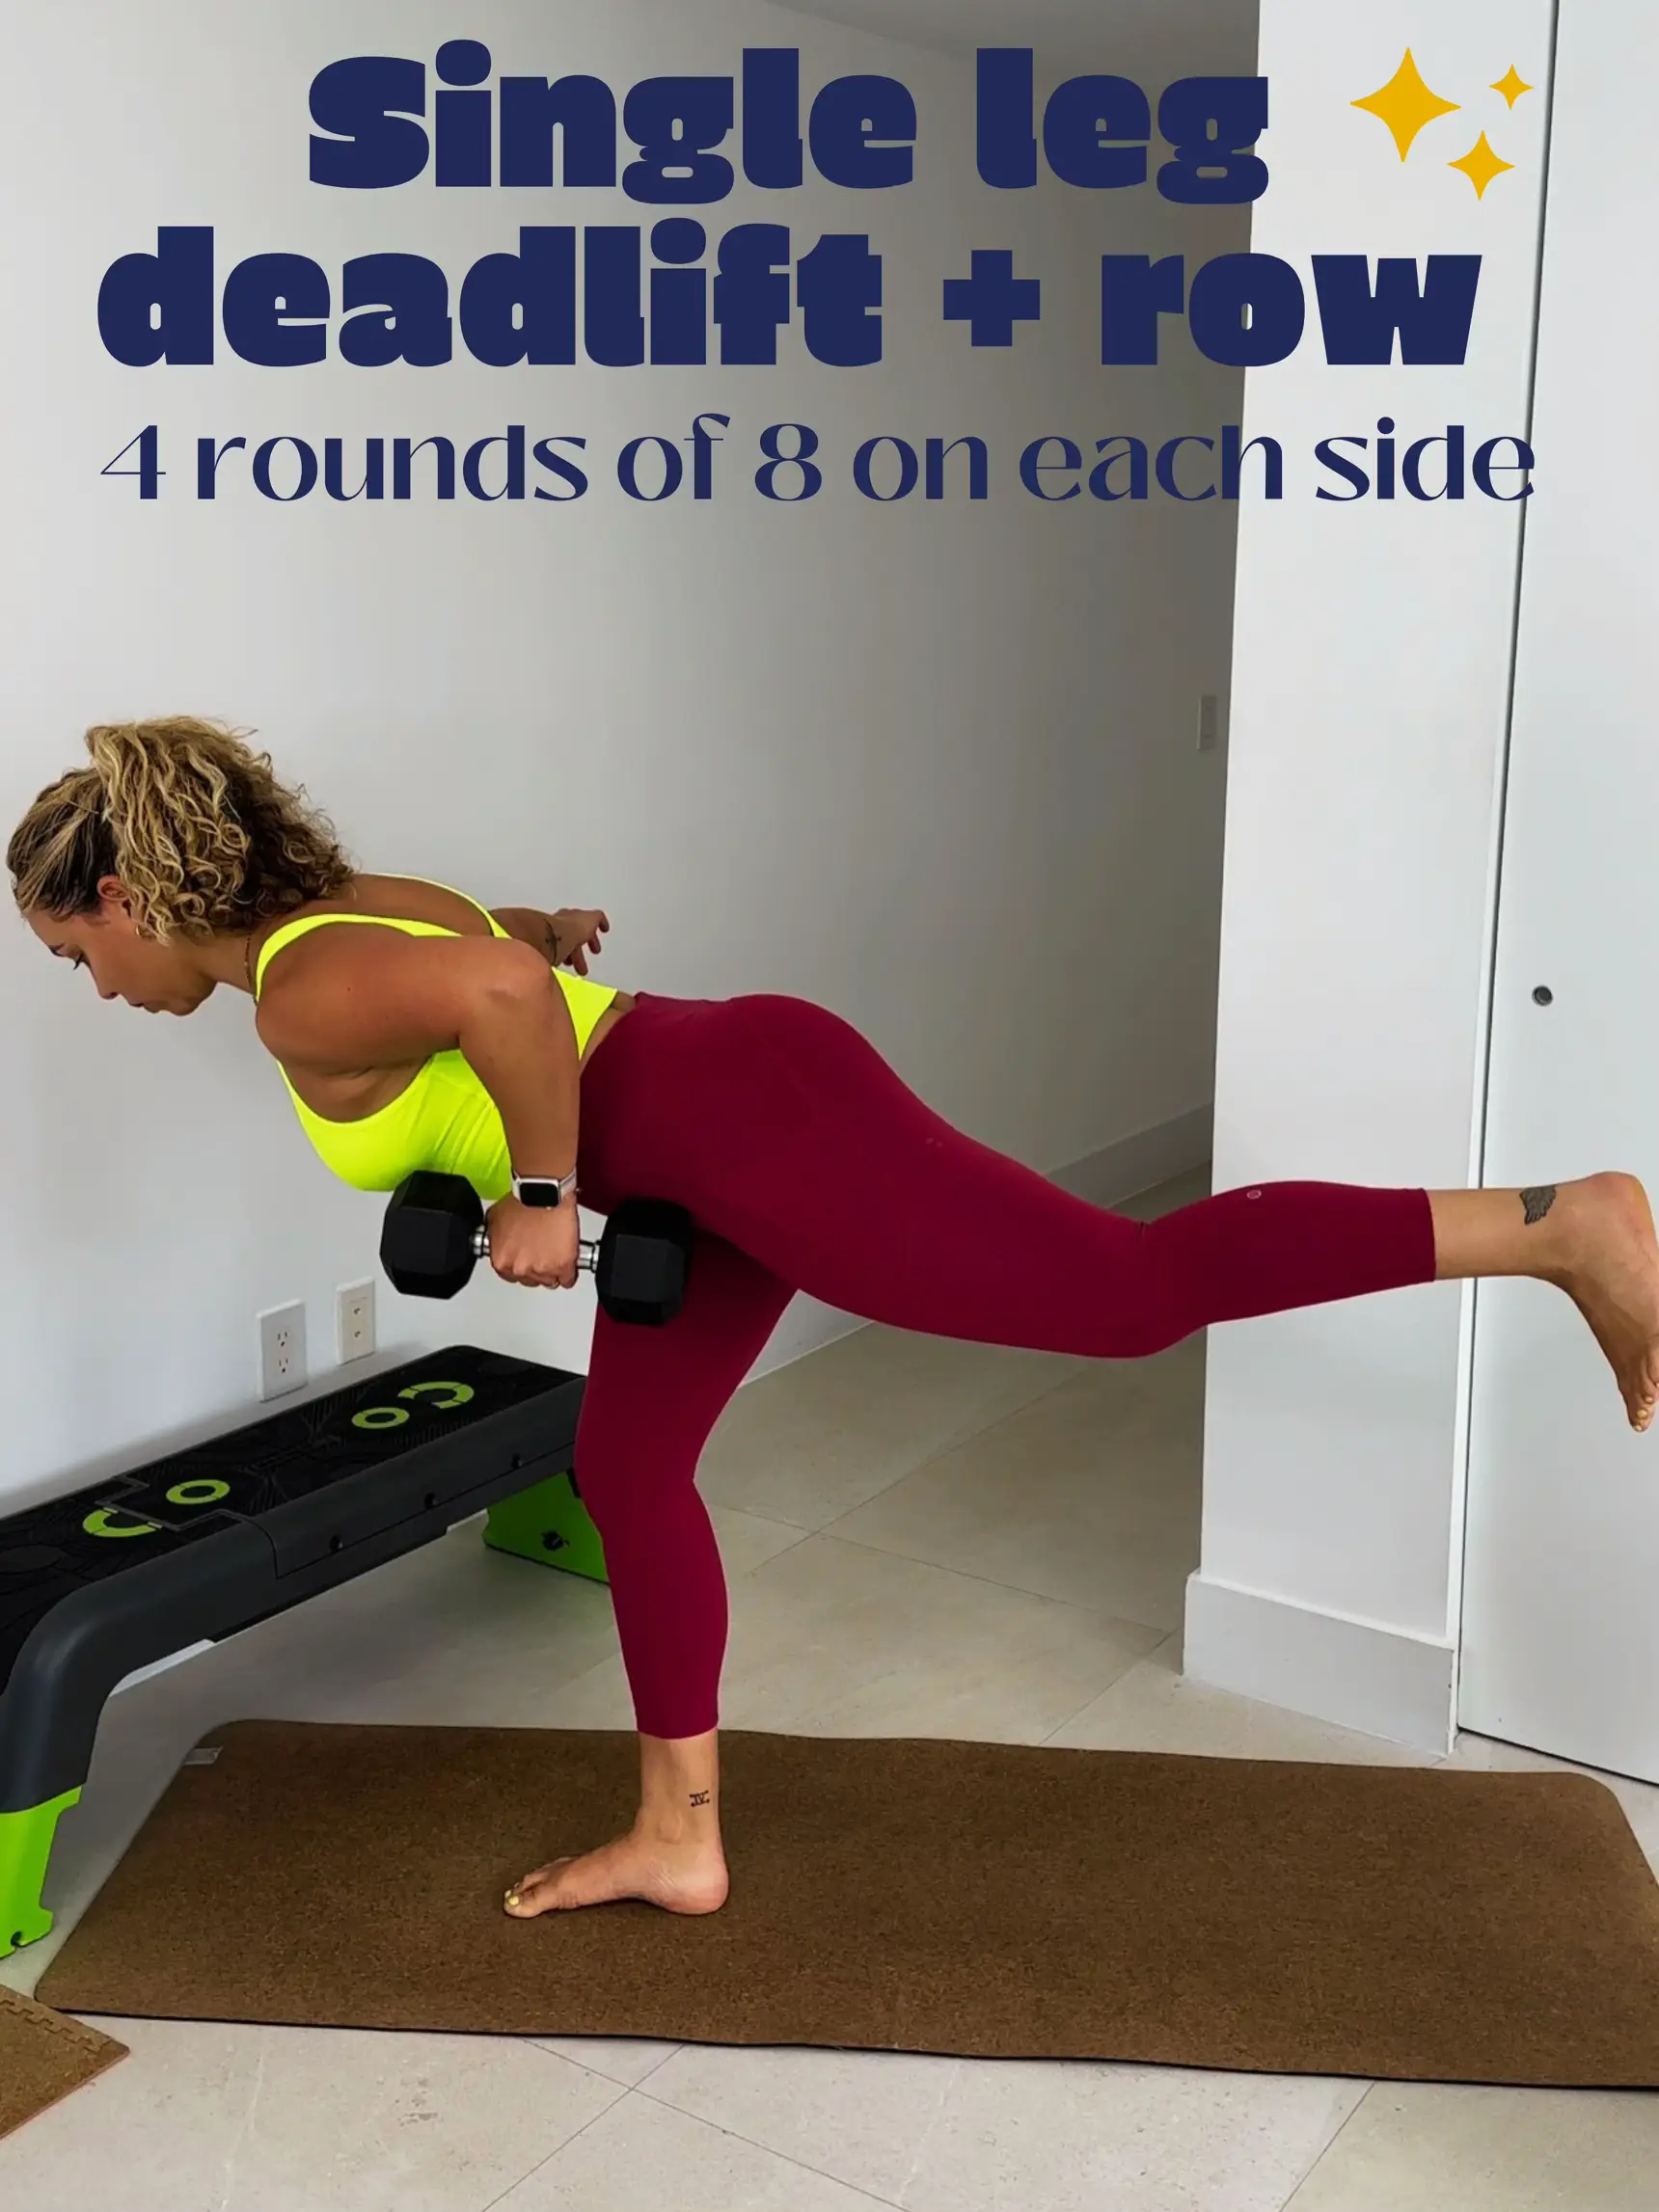 SAVE this FULL BODY workout that's quick, targets your ARMS and LEGS and  it's easy to do at home! Do 3 rounds of 10 reps each (each